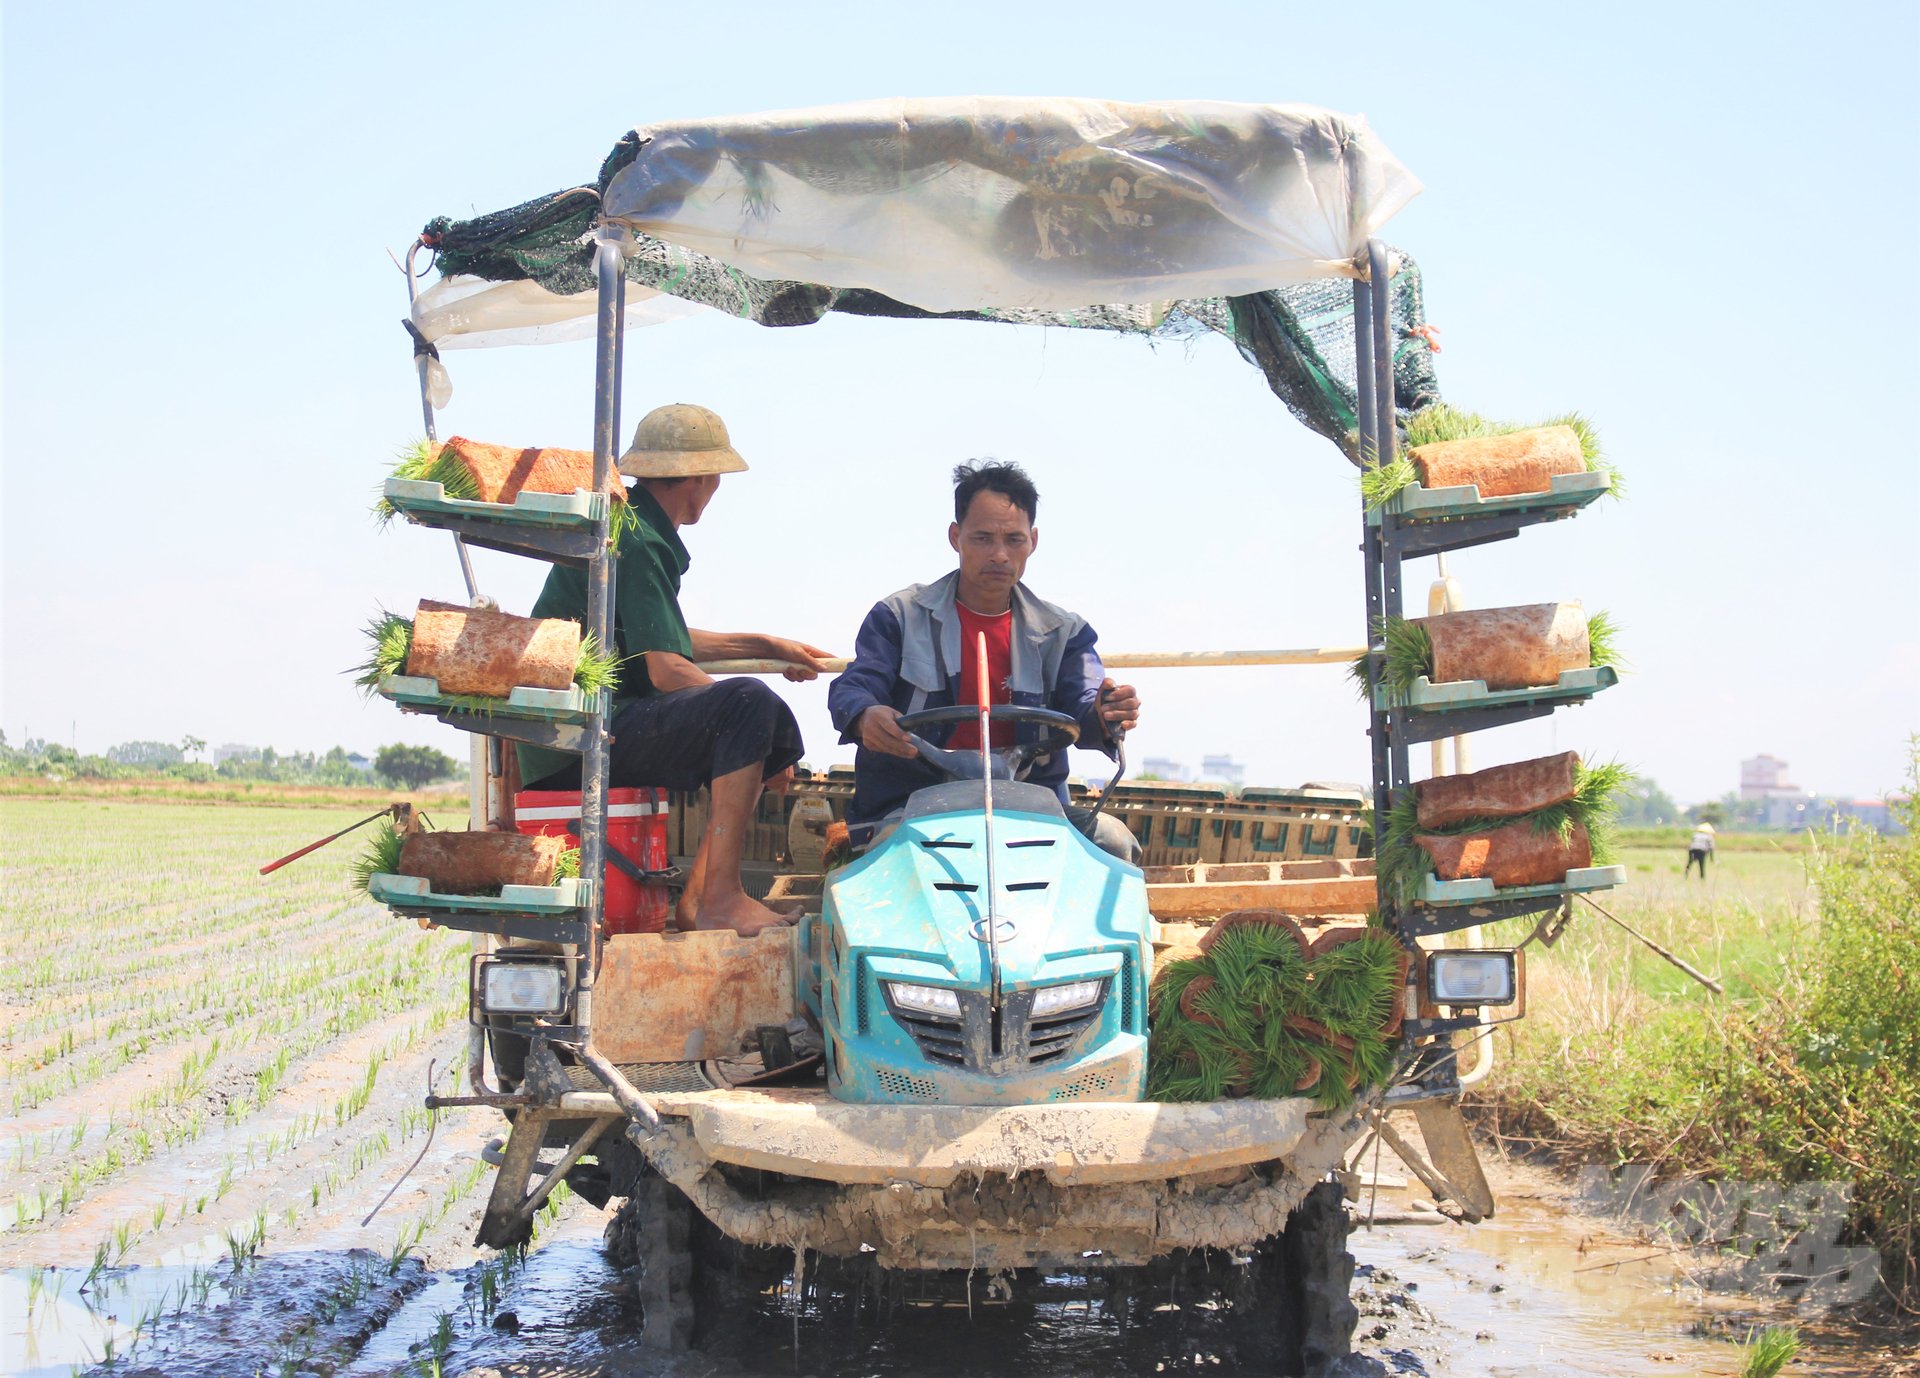 Using a transplanter-plating tray is considered a solution to solve many 'bottlenecks' in rice production at the same time. Photo: Trung Quan.